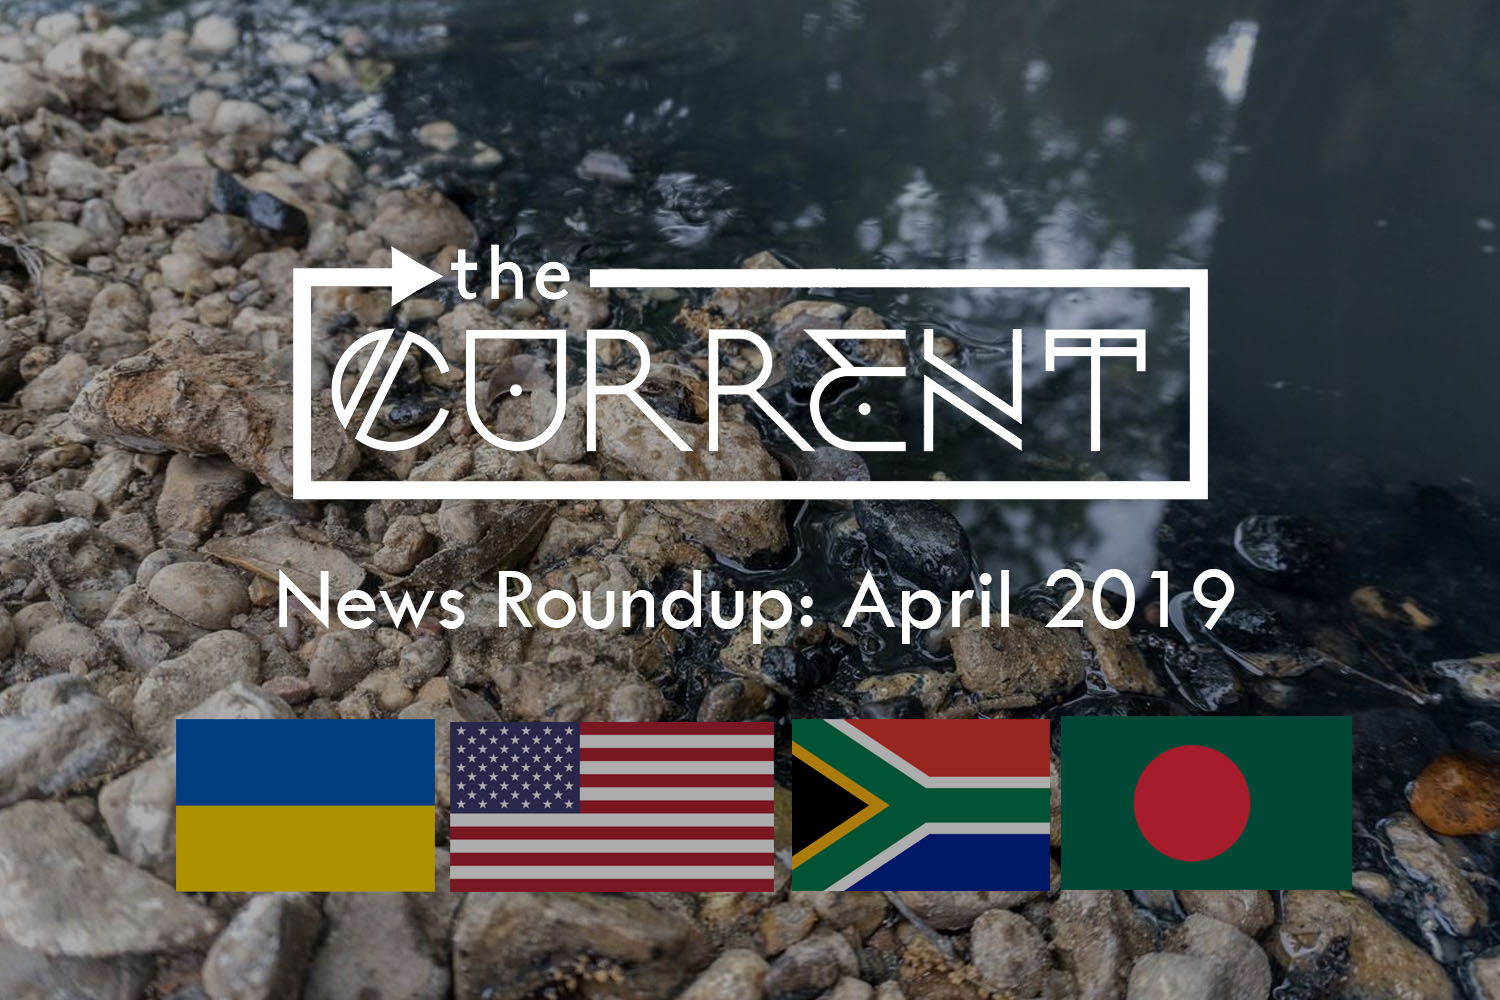 GRAPHIC: The News Roundup features 10 stories you may have missed last April 2019. Image features the blackened Skull Creek in Texas with the Ukraine, U.S., South Africa and Bangladesh flags. Text reads "The Current - News Round up: Febrary 2019. Photo courtesy of Michael Stravato and The Texas Tribune. Flags are public domain. Graphic created by Trey Blakely and The Signal Online Editor Alyssa Shotwell.